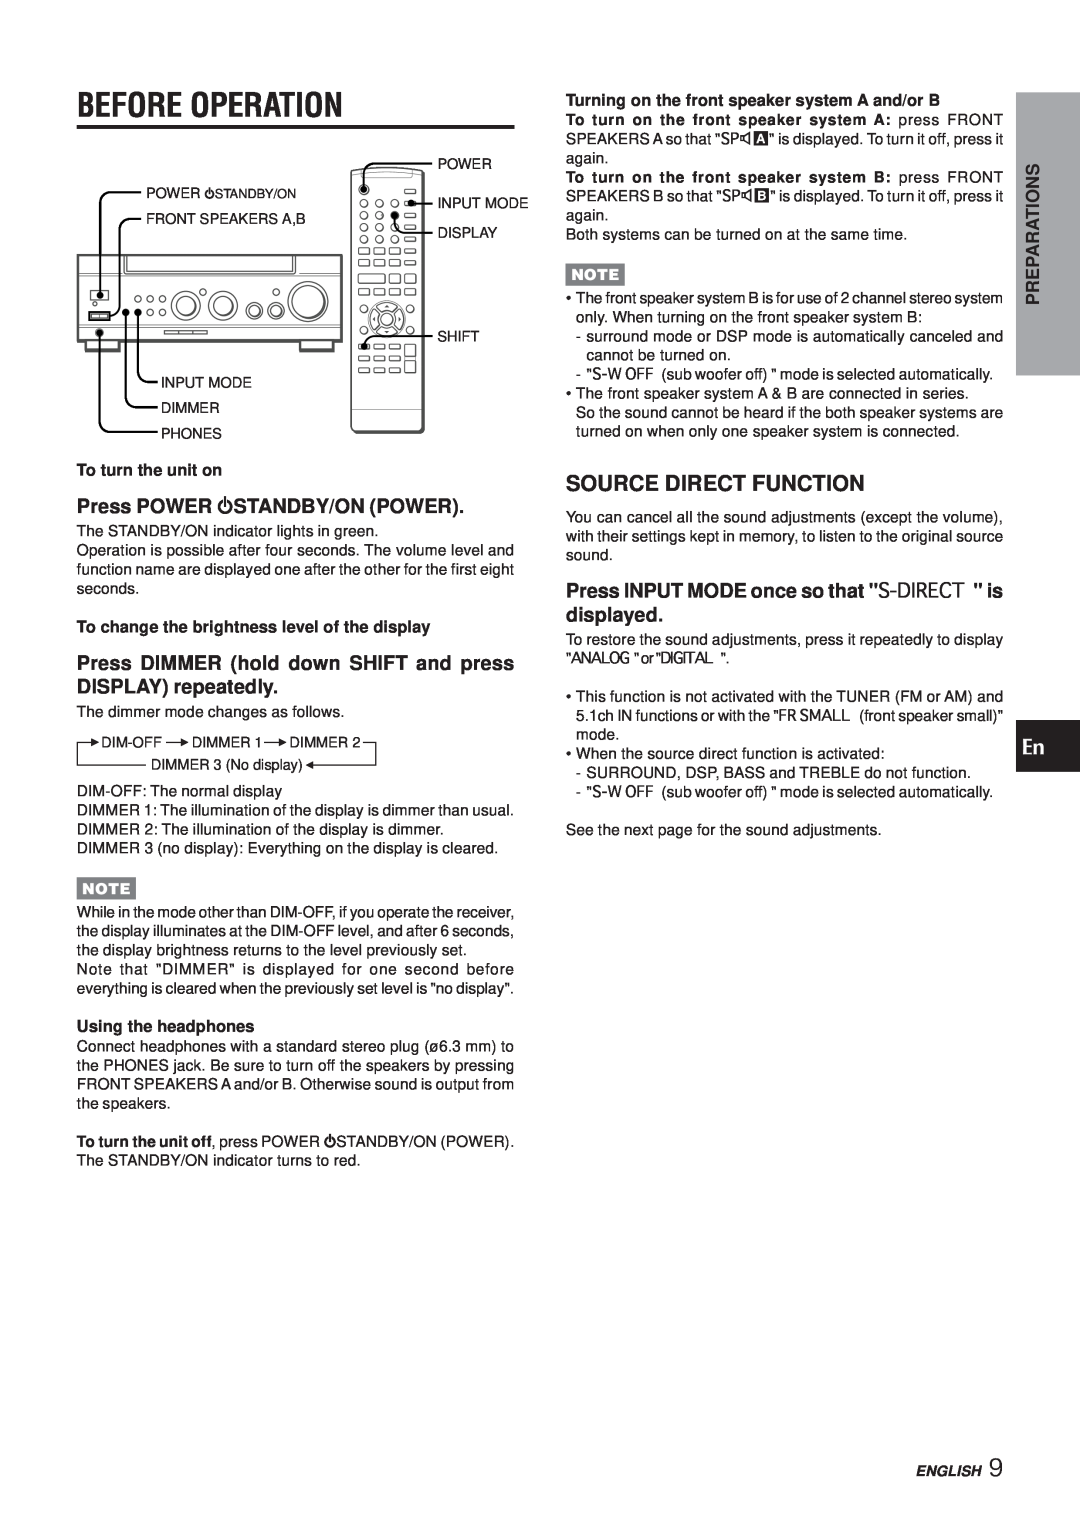 Aiwa AV-NW50 manual Before Operation, Source Direct Function 